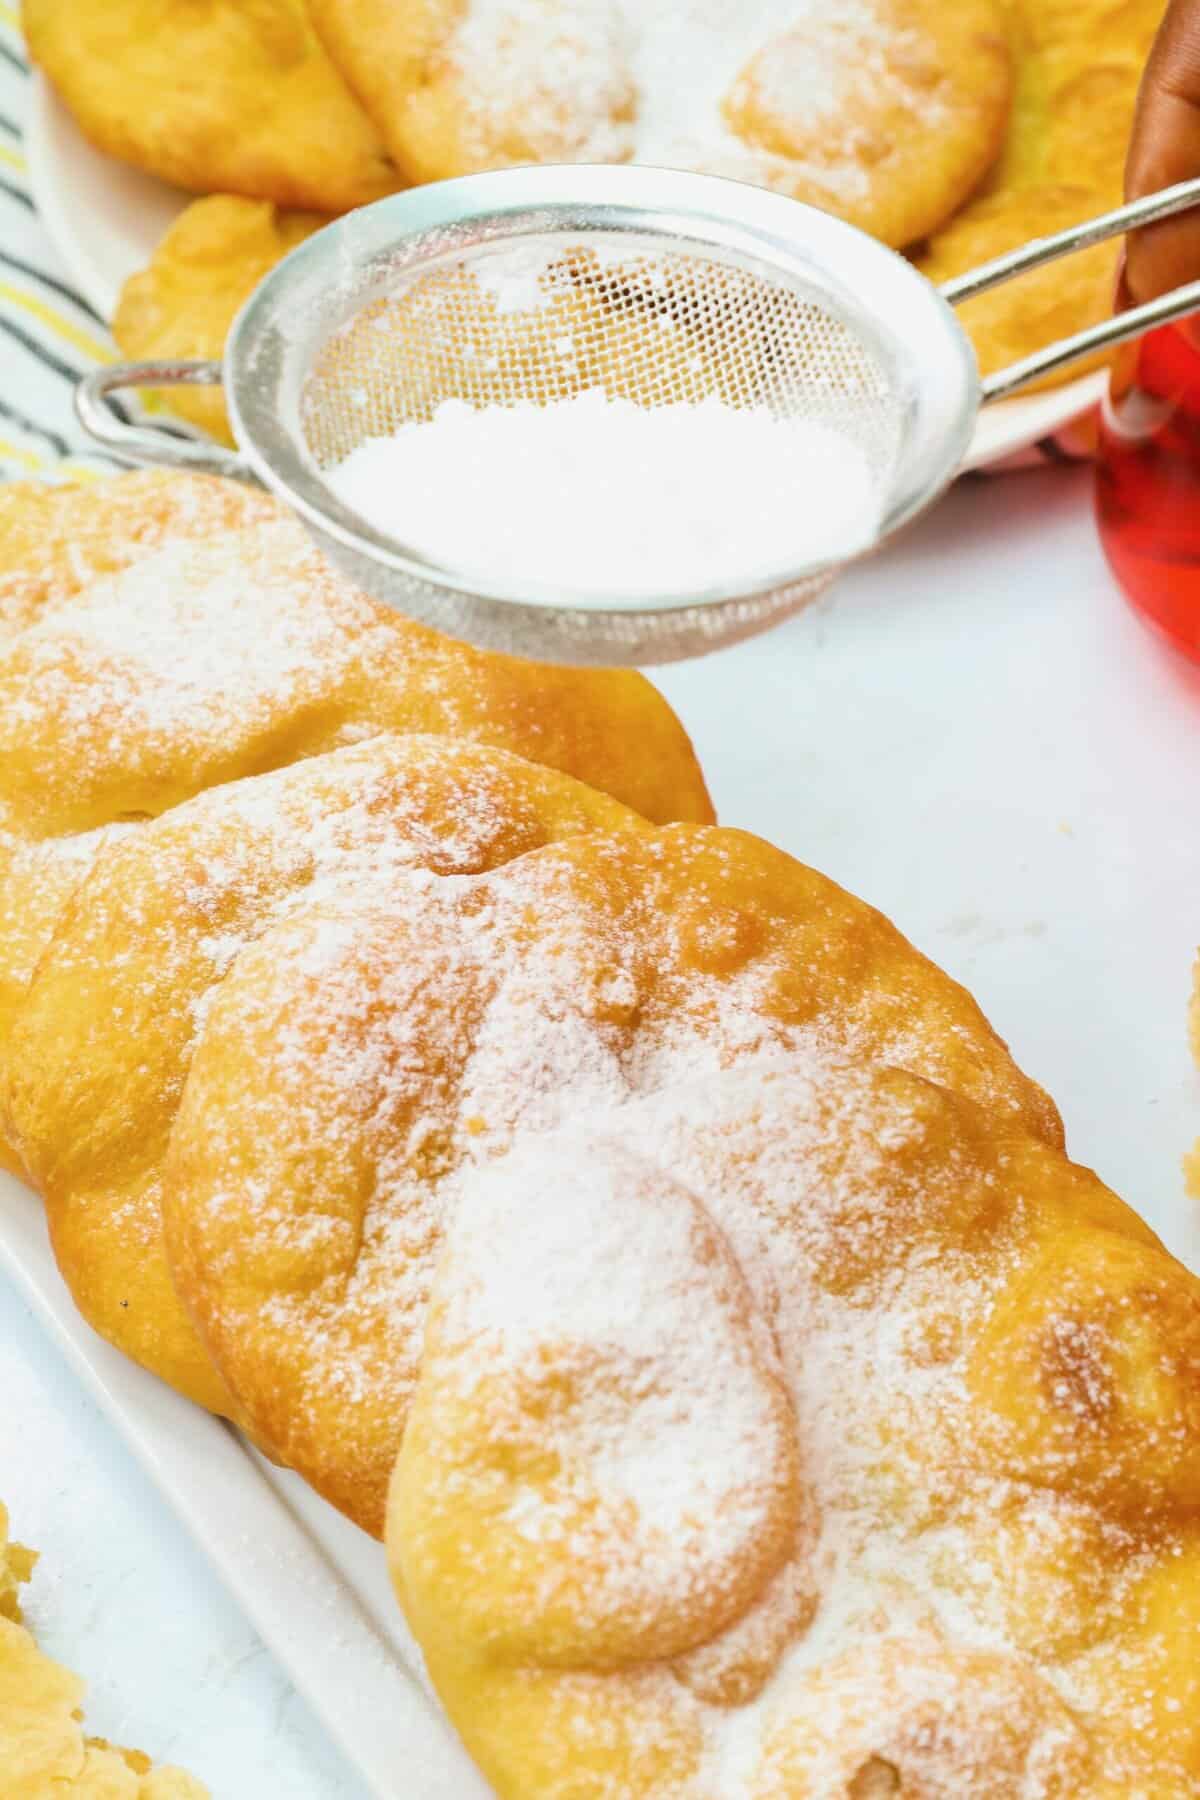 Dusting the amazing fried dough with powdered sugar